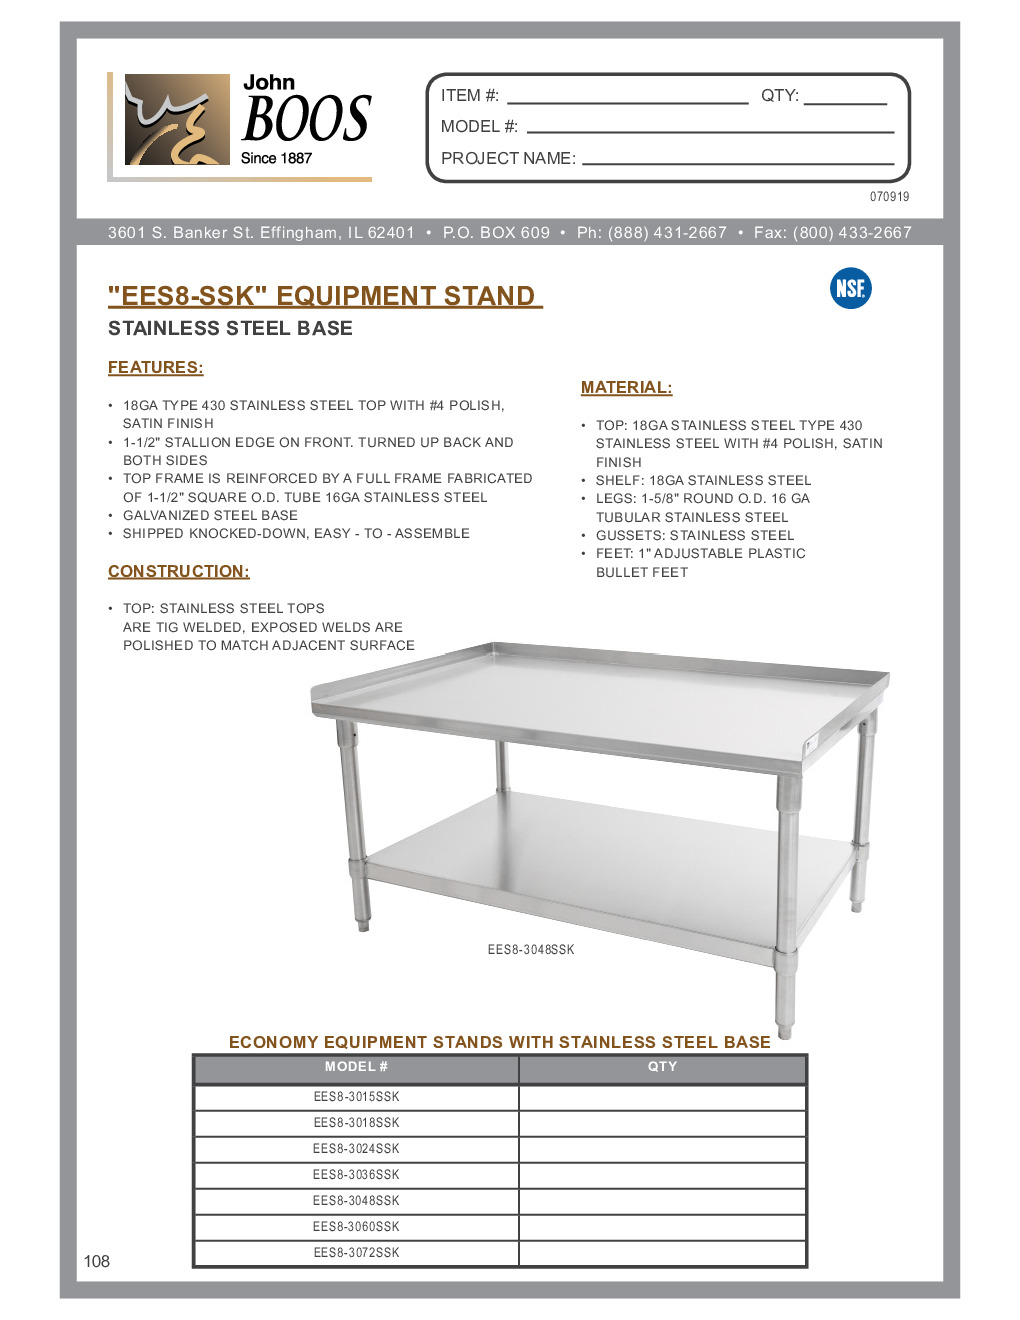 John Boos EES8-3072SSK-X for Countertop Cooking Equipment Stand